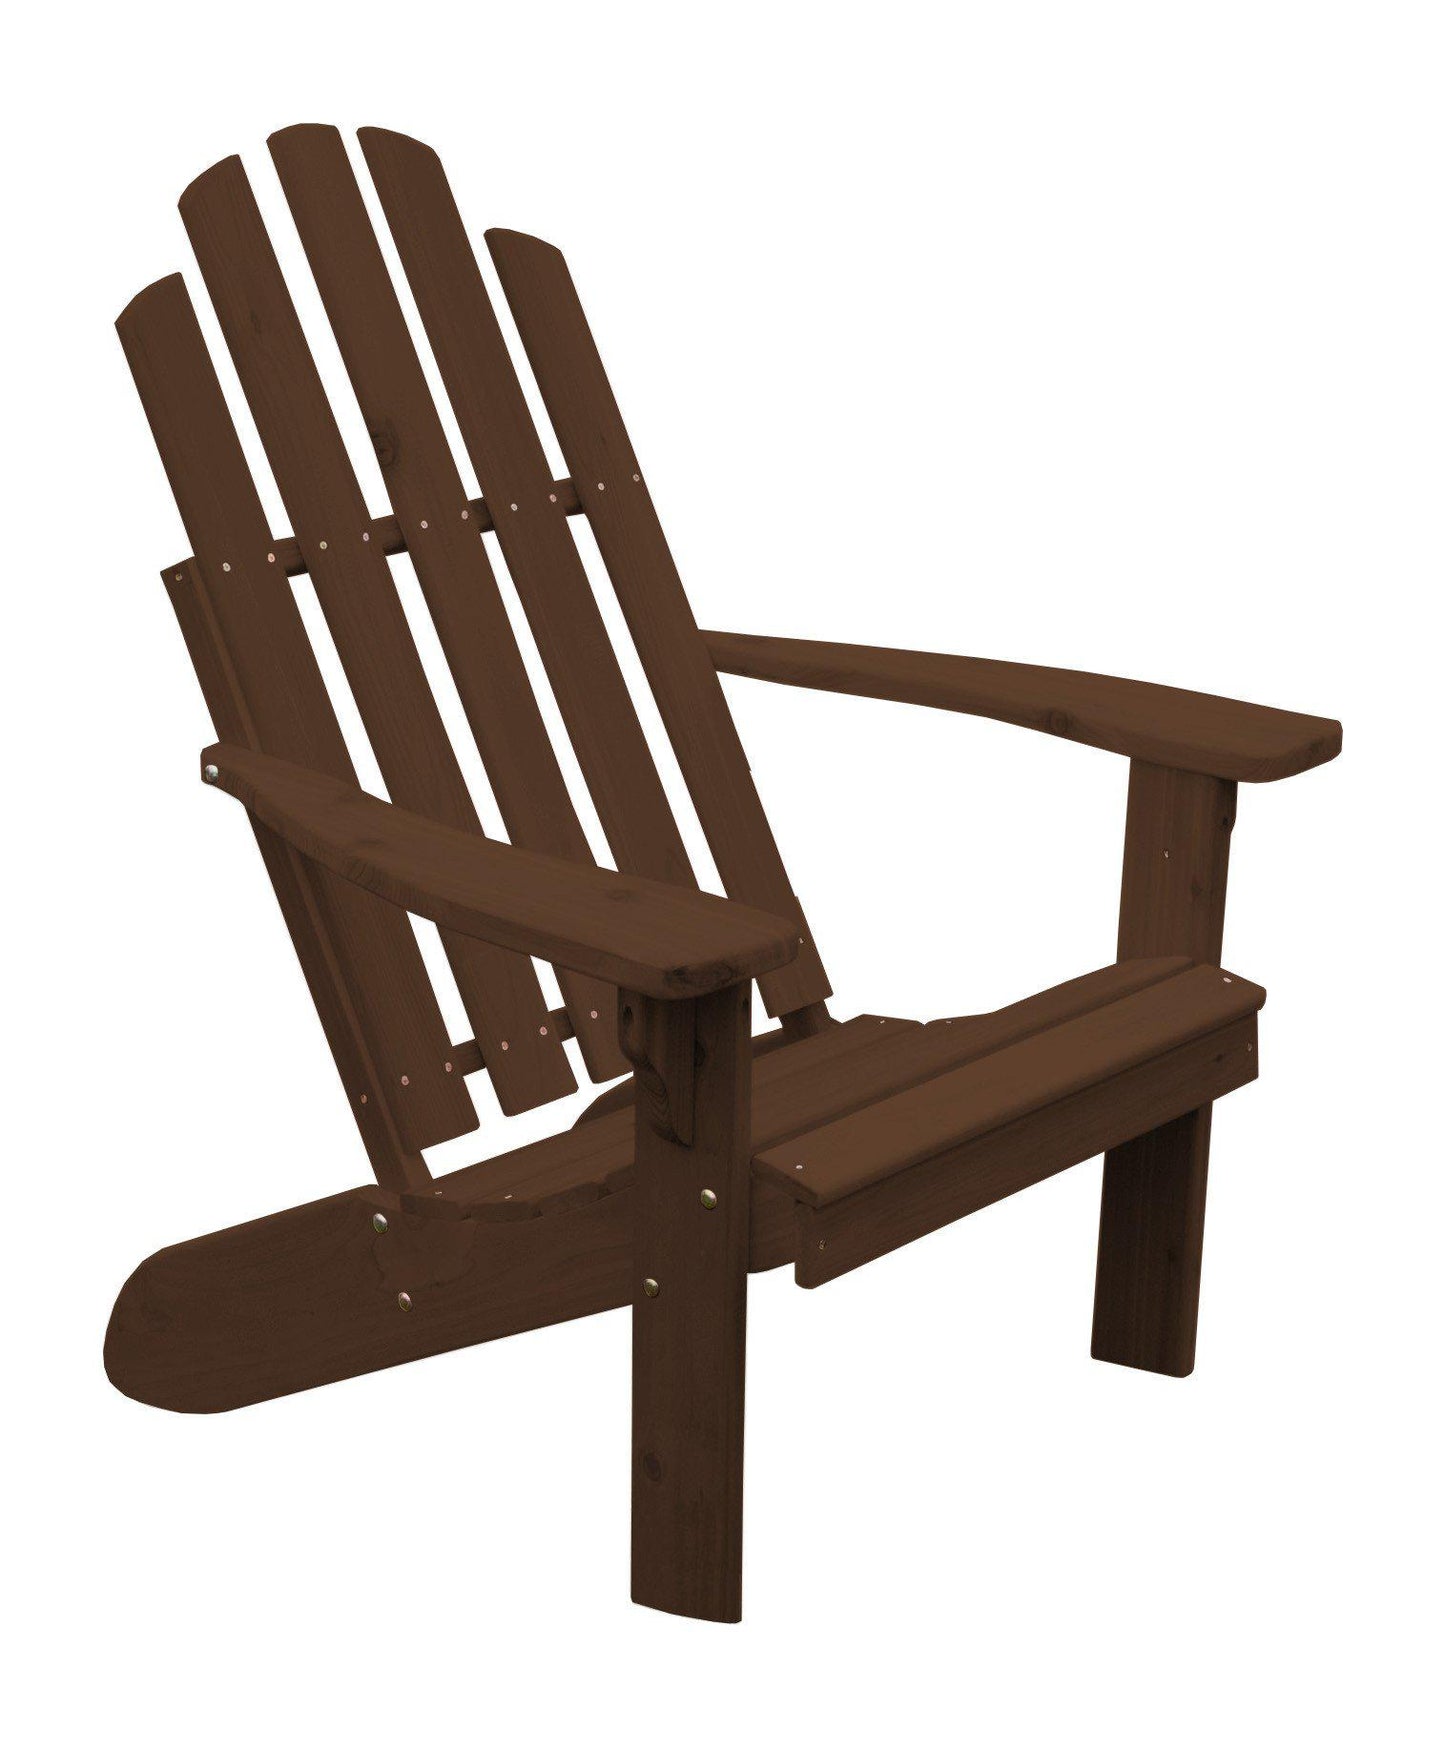 Regallion Outdoor Western Red Cedar Kennebunkport Adirondack Chair - LEAD TIME TO SHIP 2 WEEKS